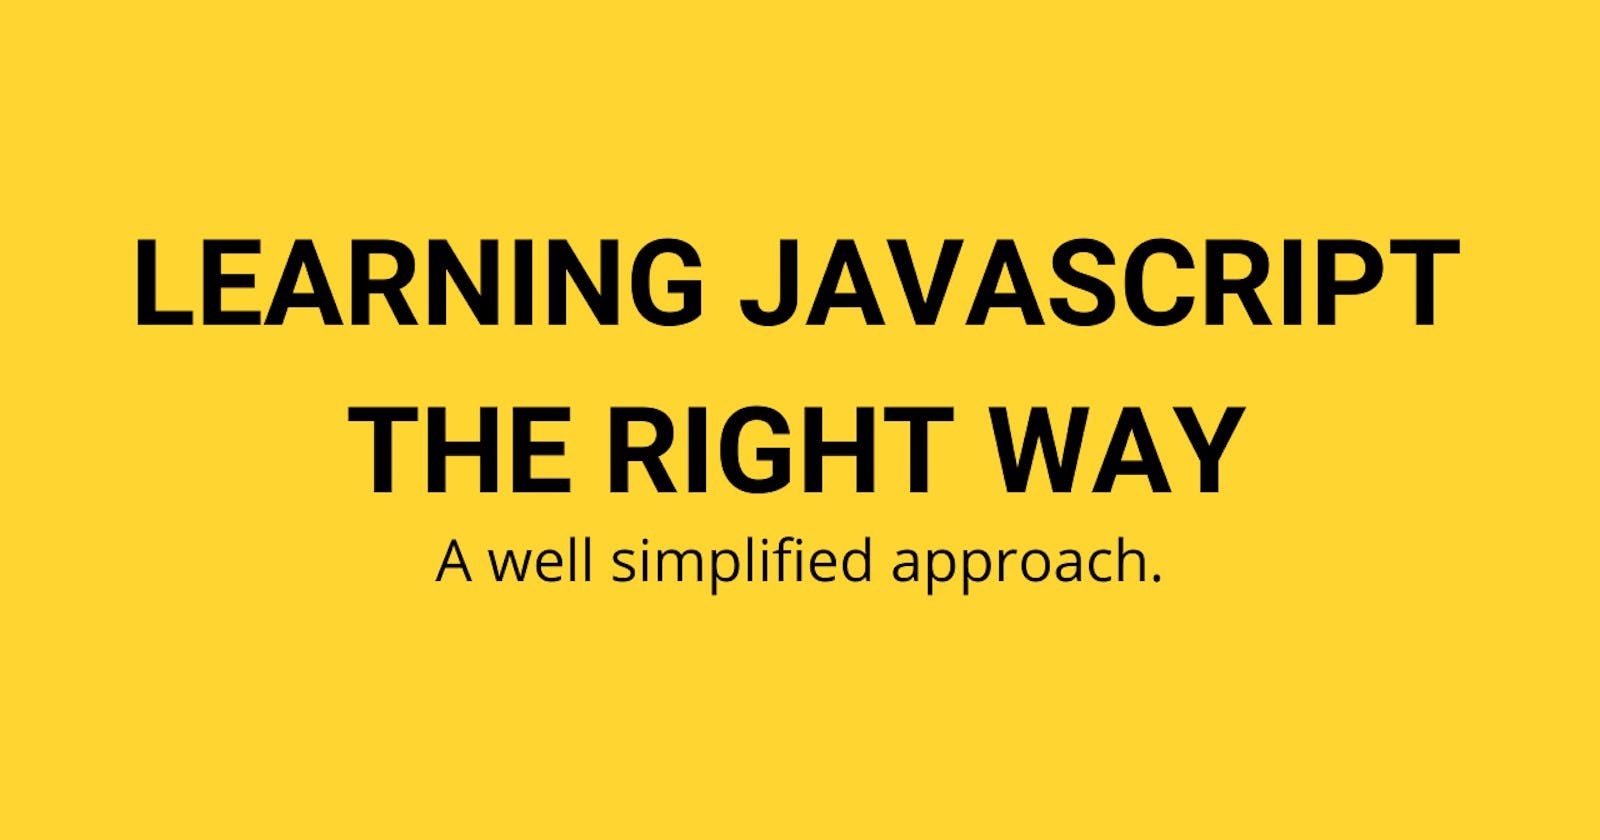 Learning JavaScript the Right Way: A Well Simplified Approach.